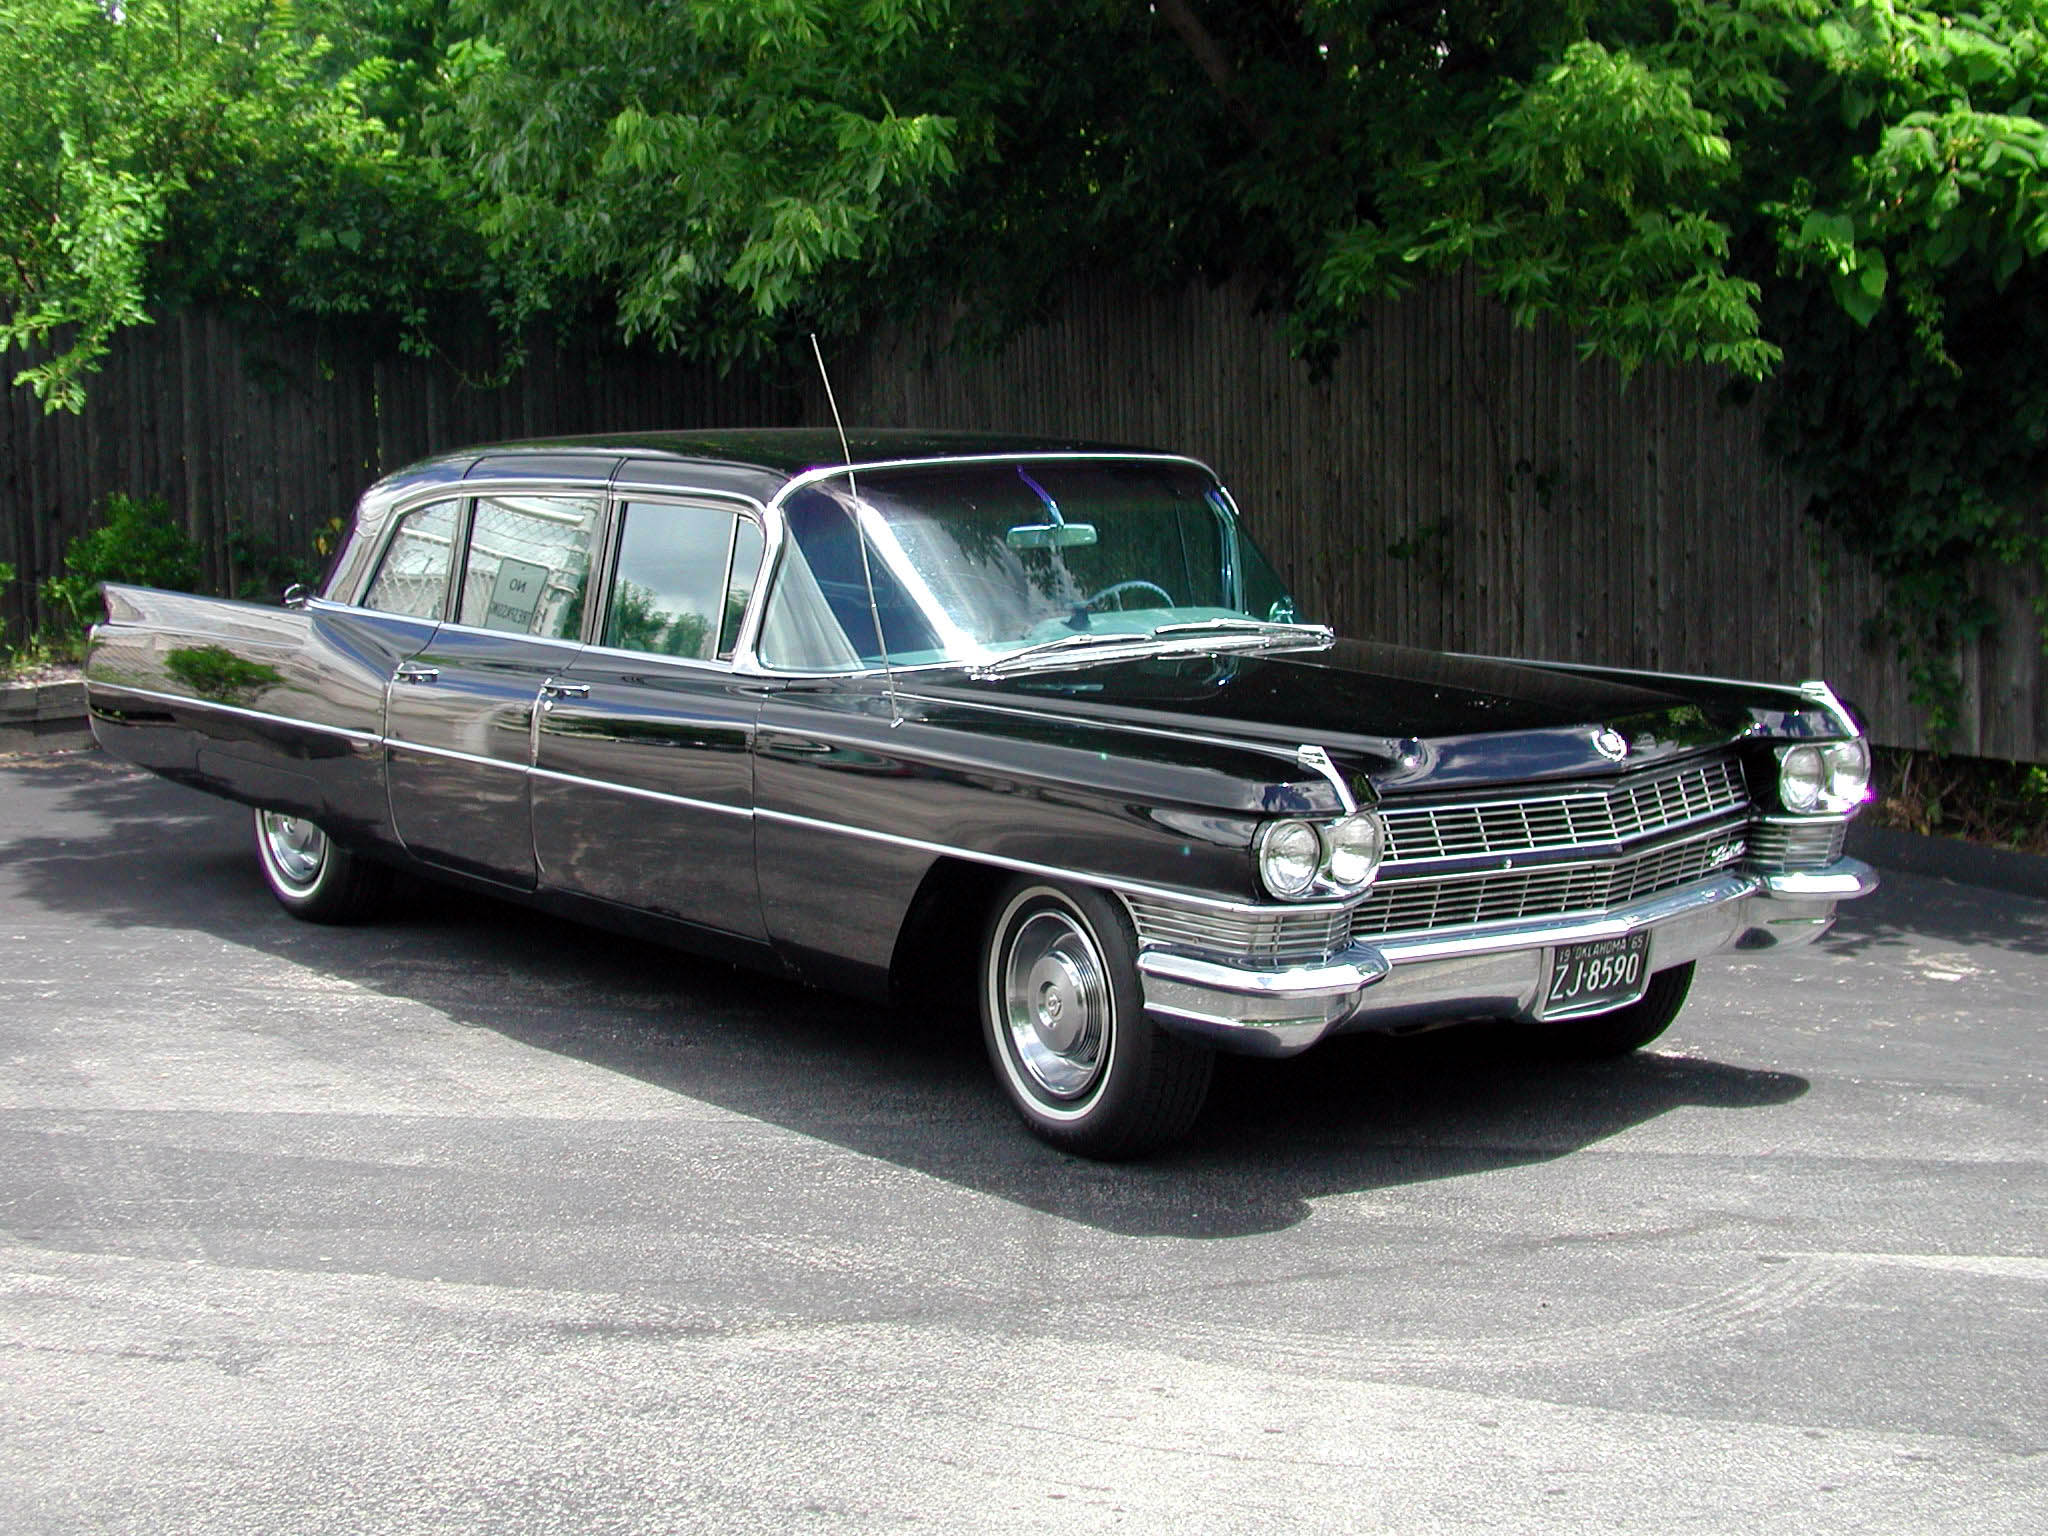 1961 cadillac fleetwood series 75 imperial